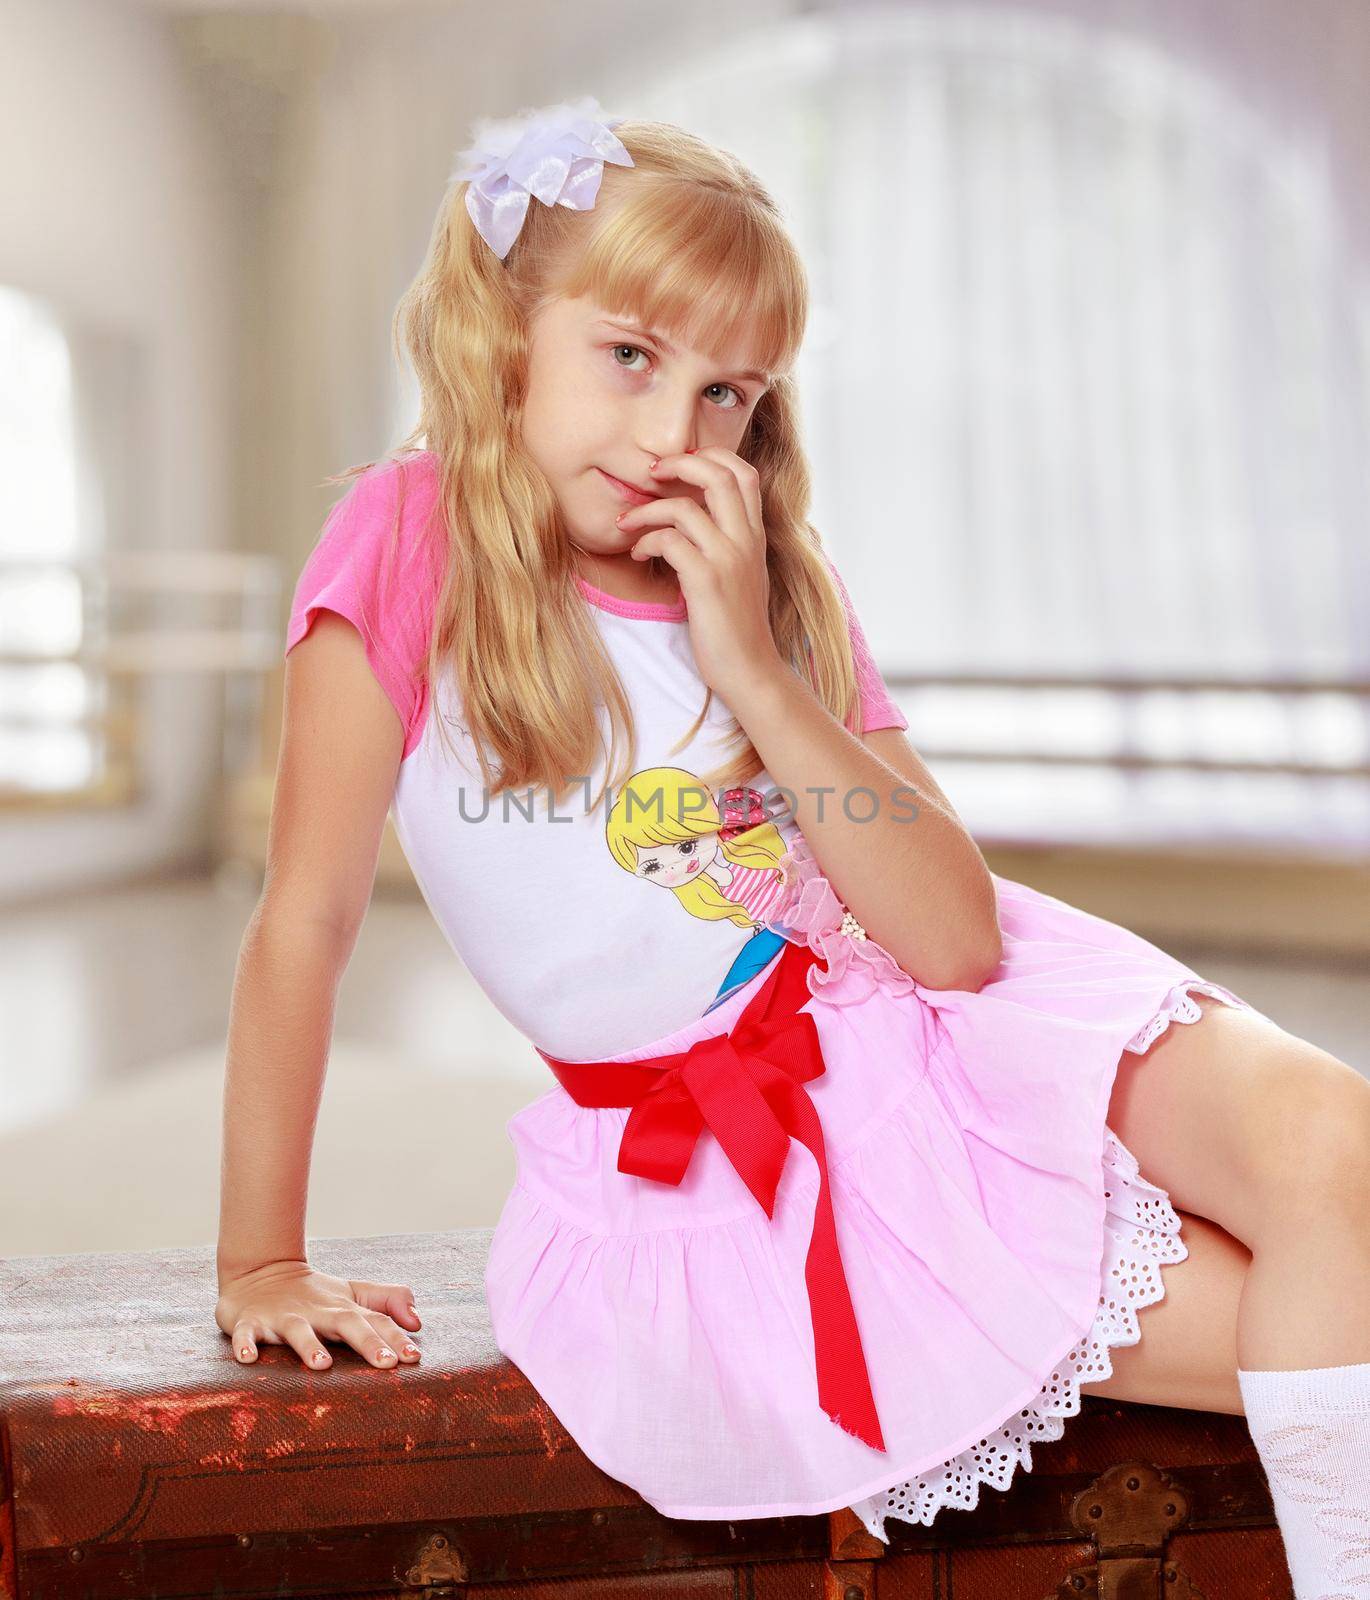 Beautiful little girl in a pink short skirt and white socks sitting on the old road suitcase.In a room with a large semi-circular window.